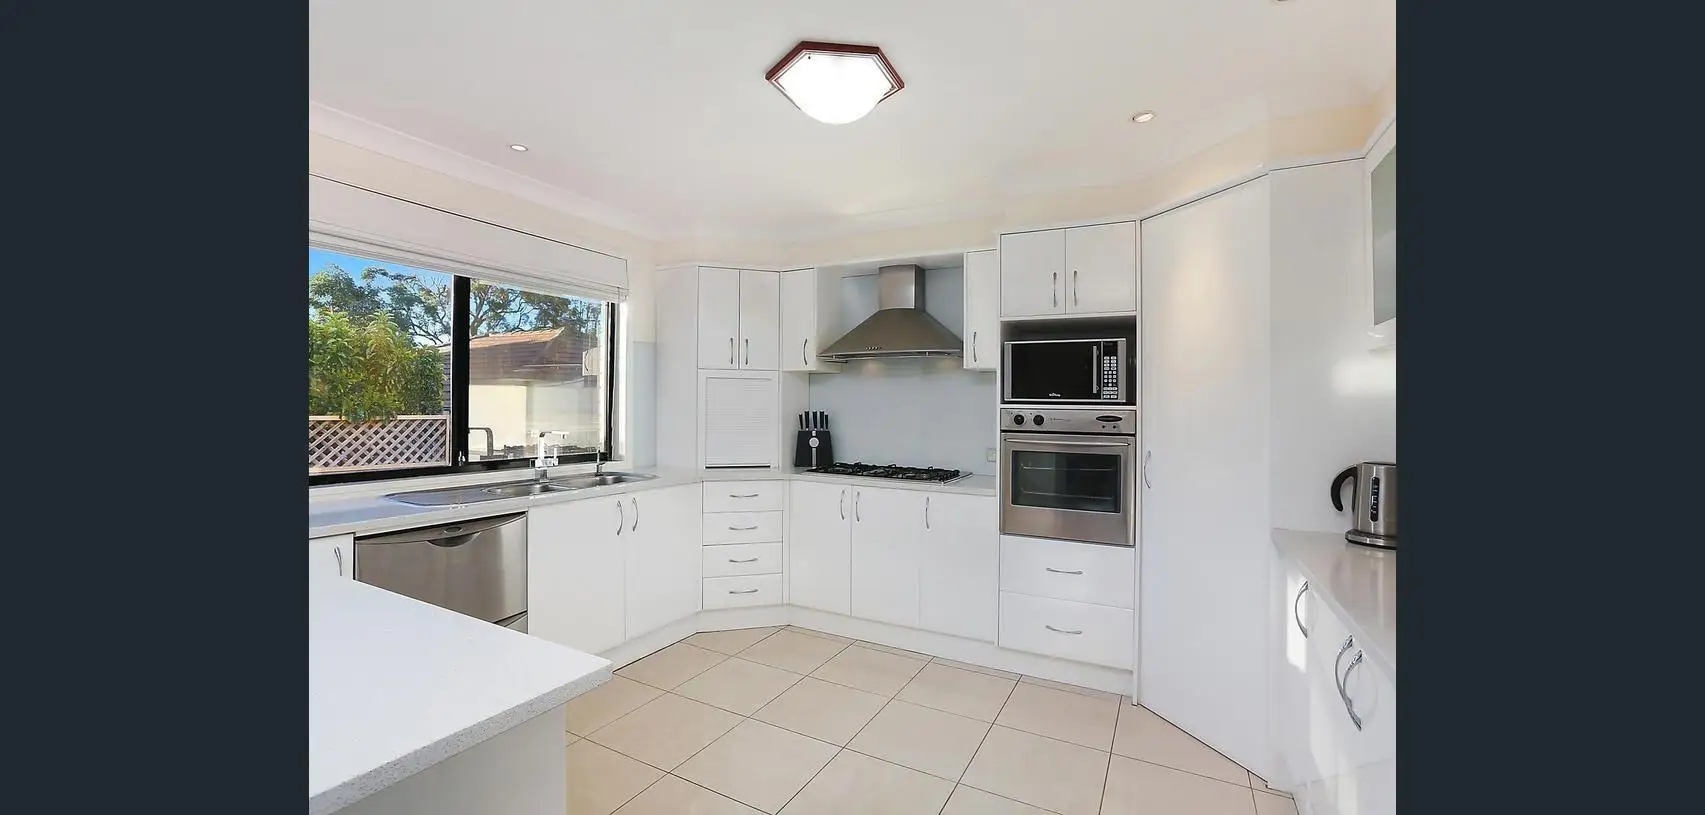 16 Hamish Court, Beaumont Hills Leased by Louis Carr Real Estate - image 1